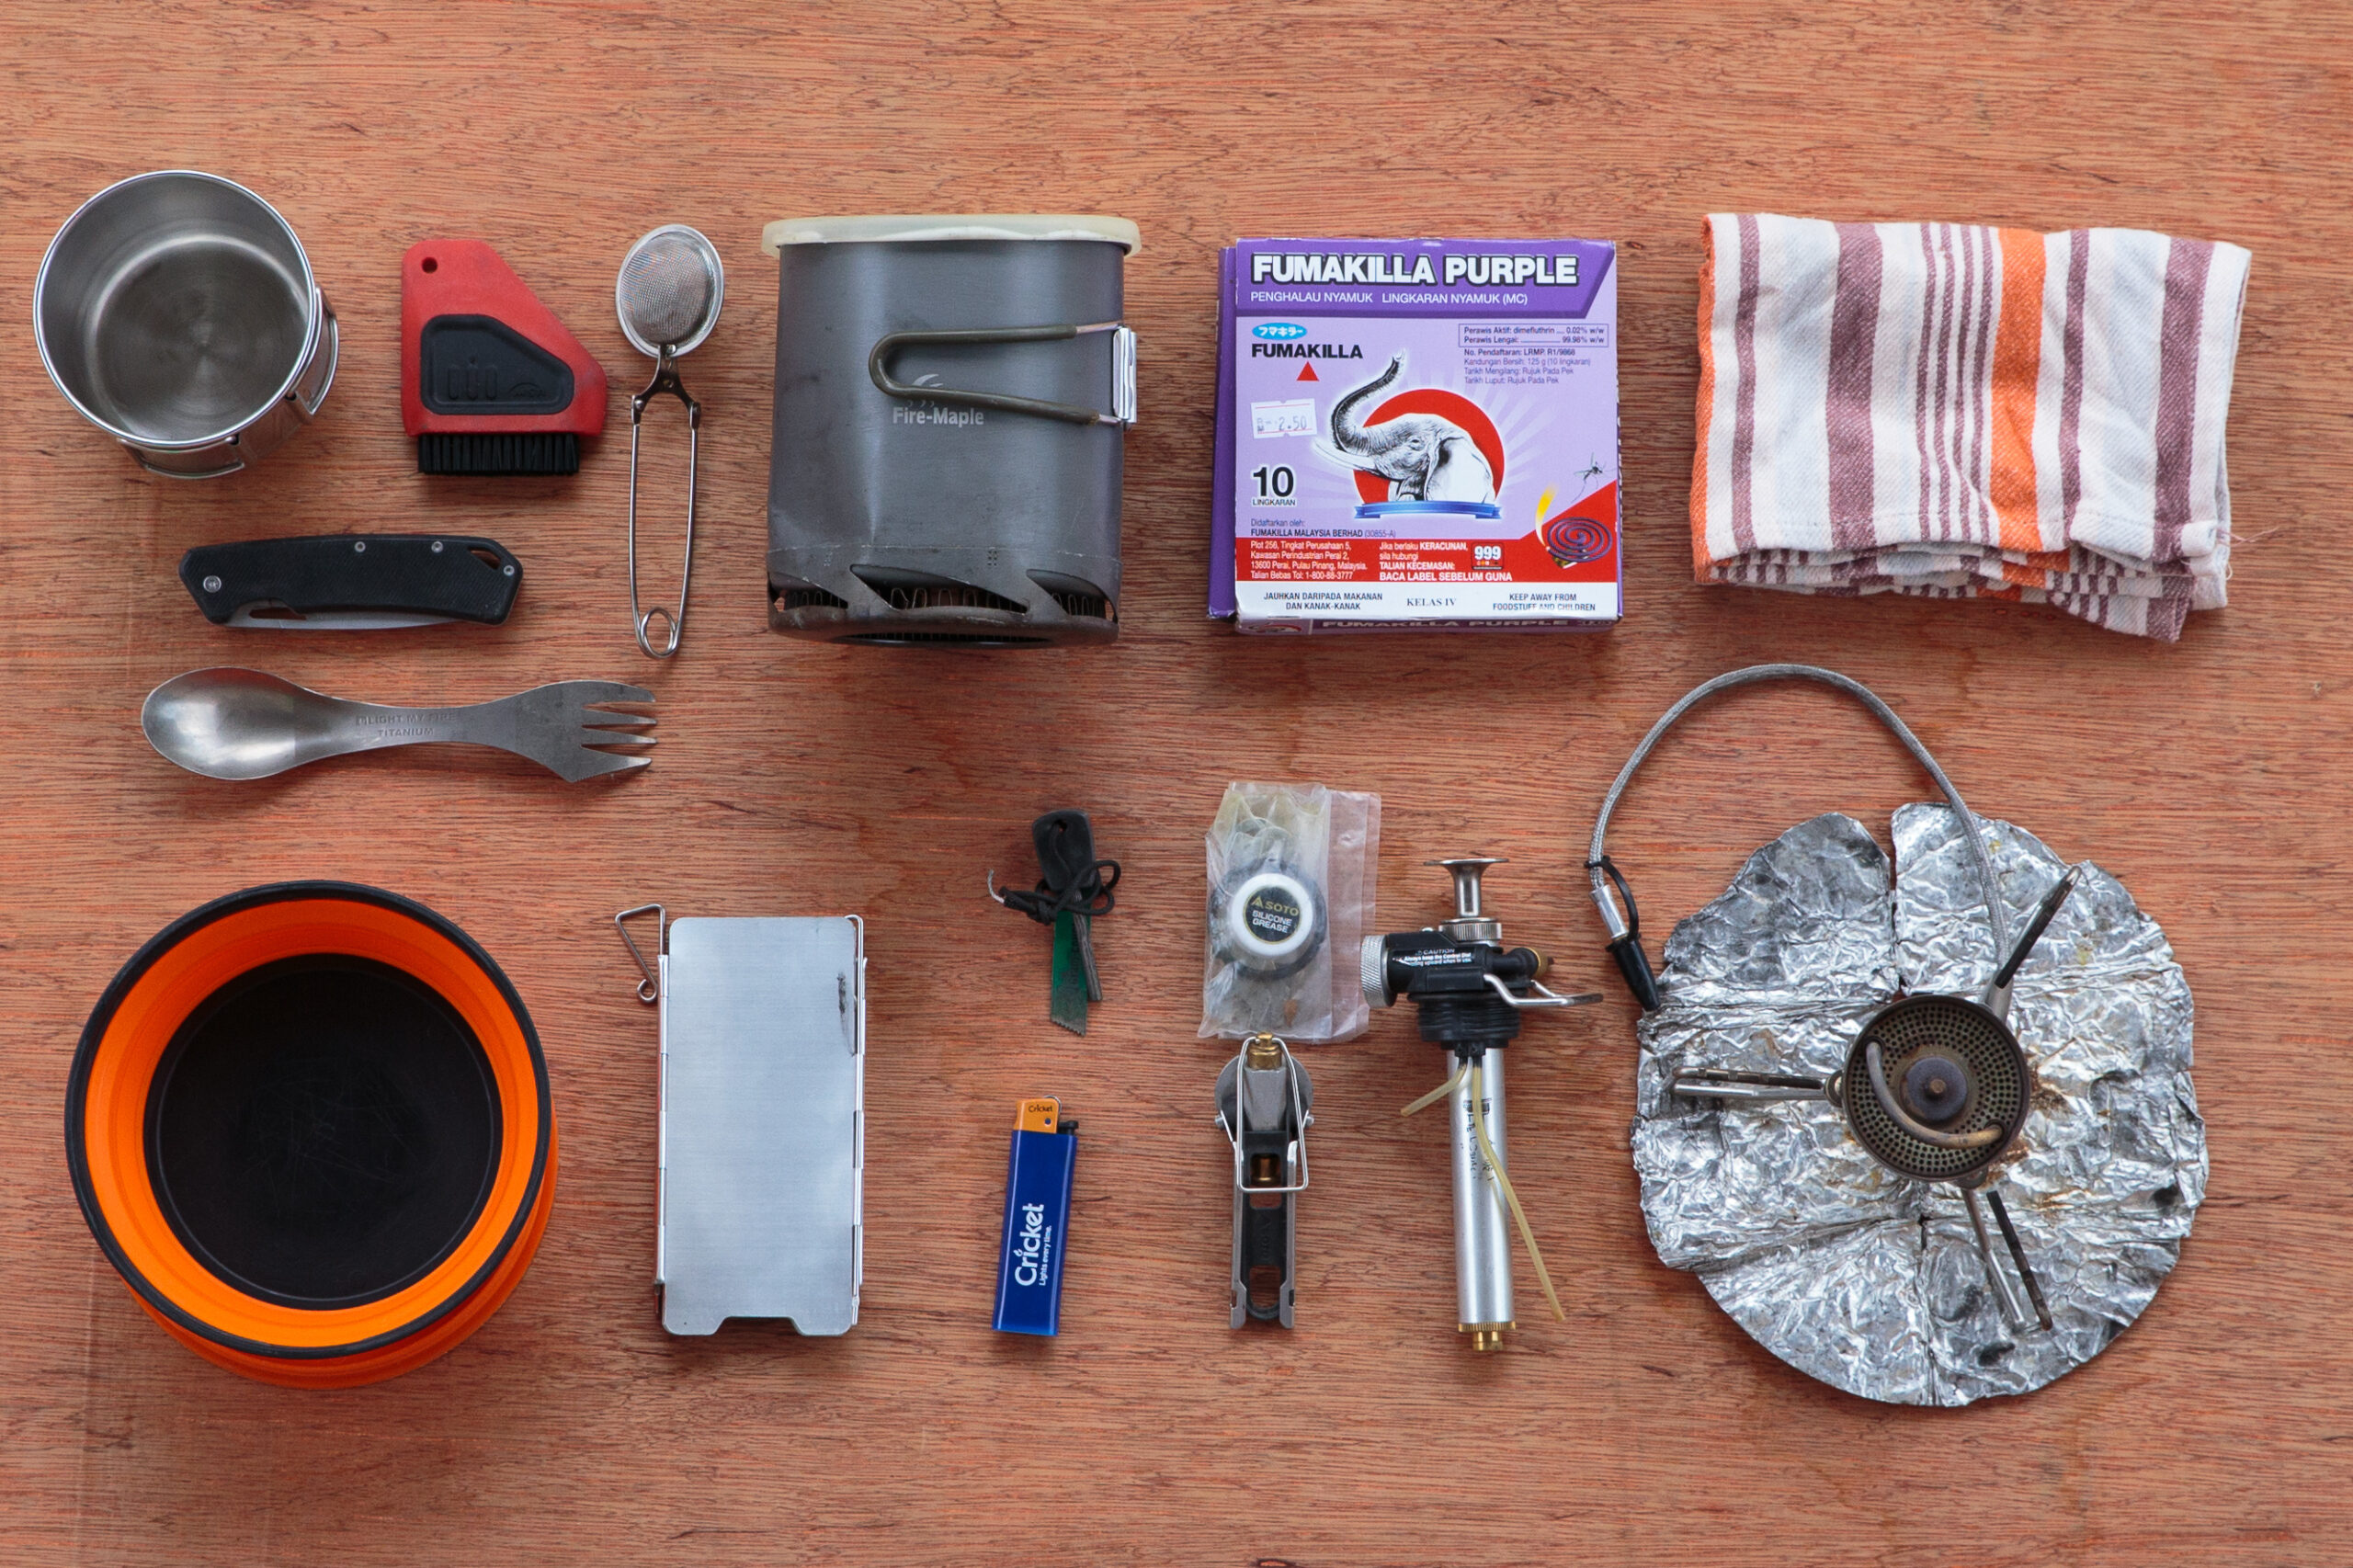 Packing for a round the world trip - Cooking Equipment